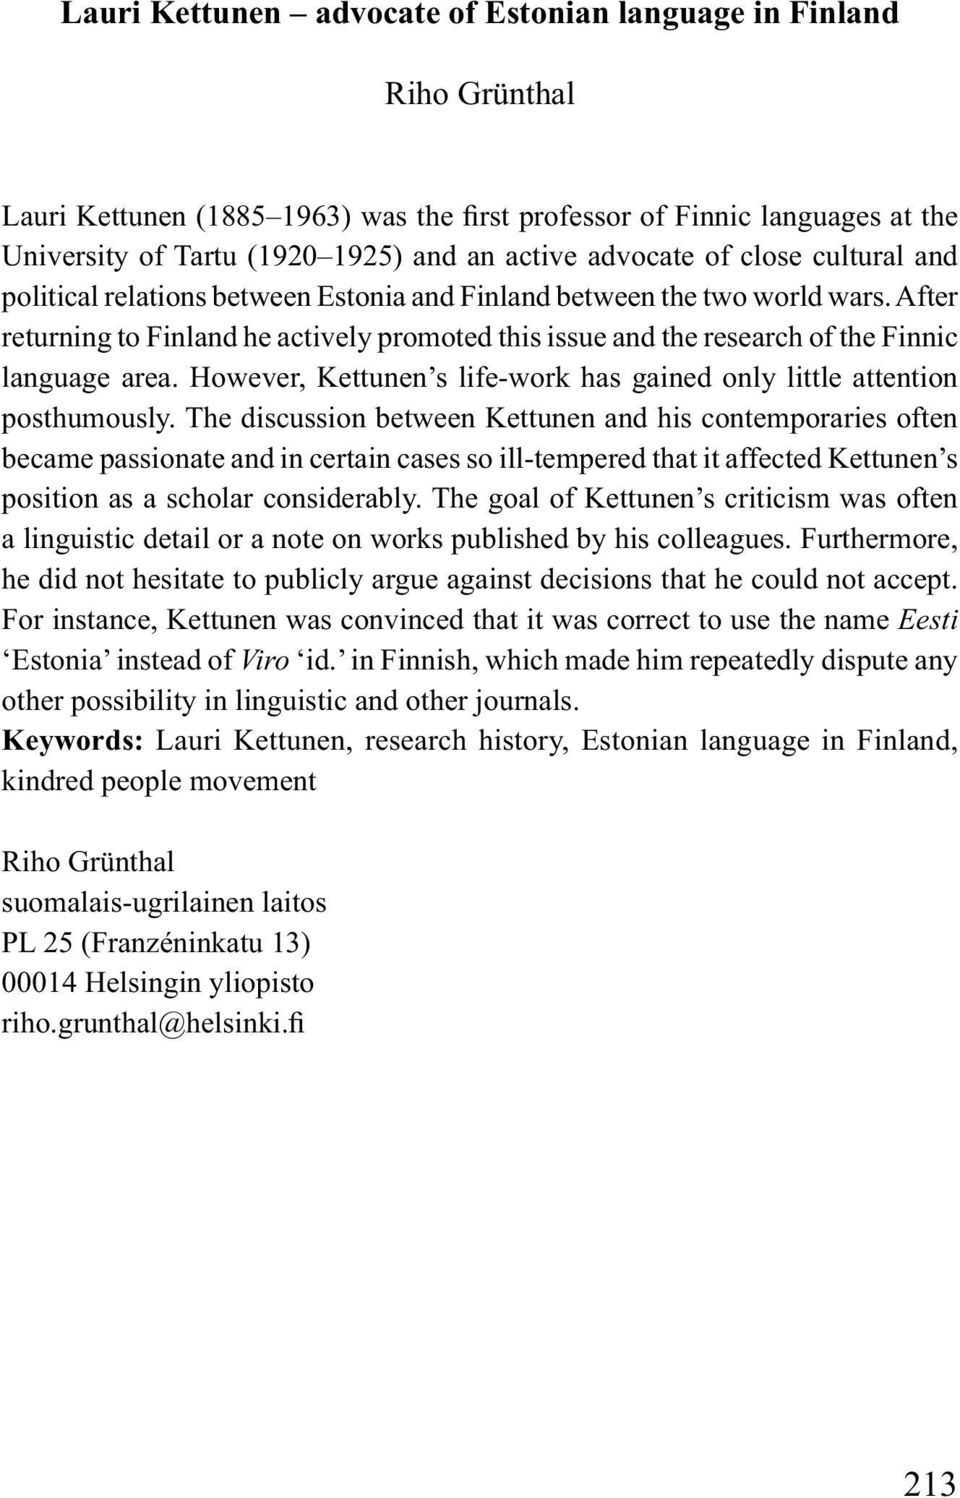 After returning to Finland he actively promoted this issue and the research of the Finnic language area. However, Kettunen s life-work has gained only little attention posthumously.